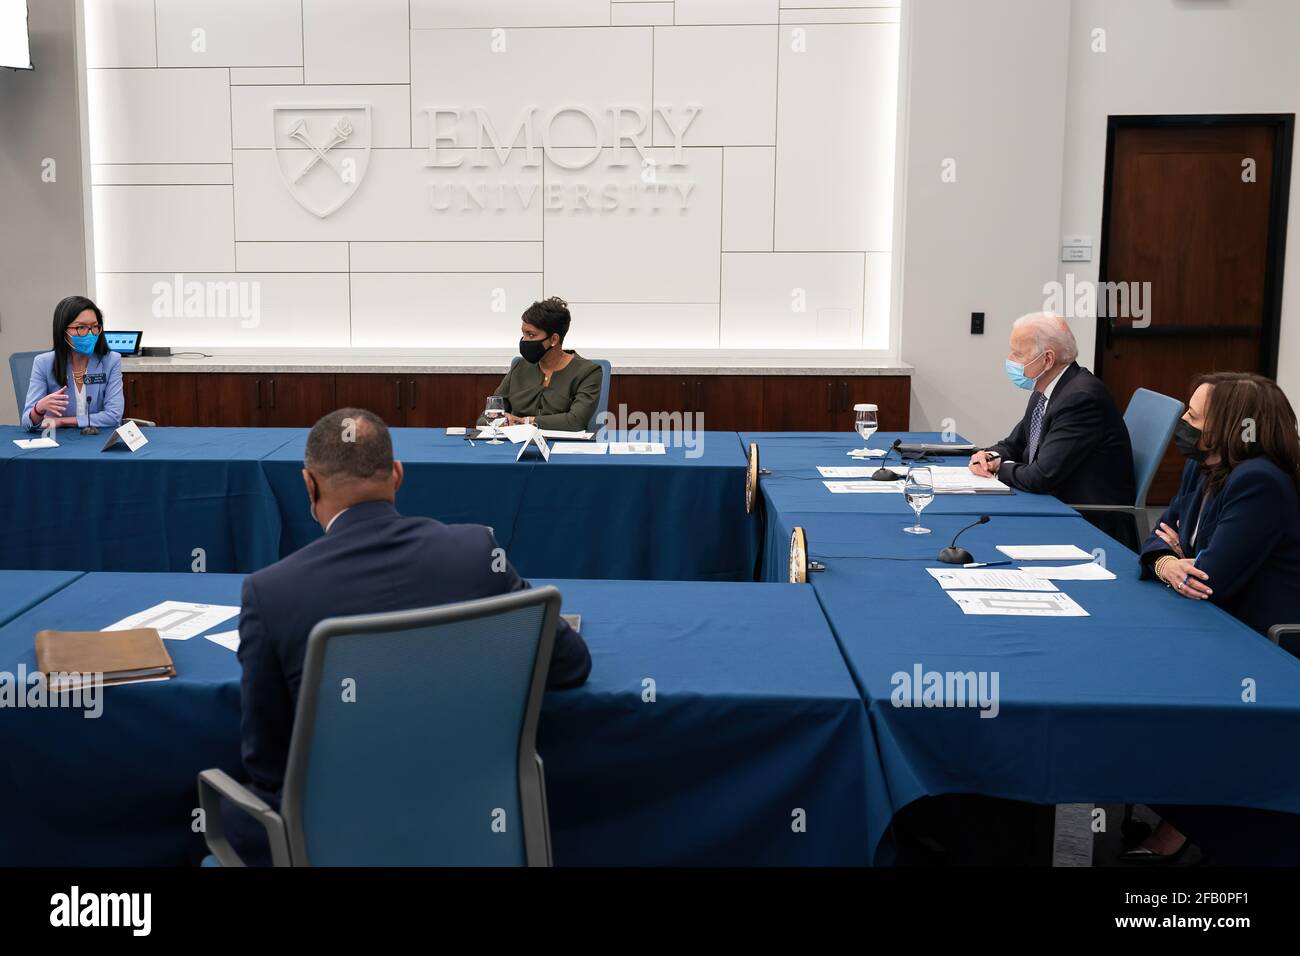 President Joe Biden and Vice President Kamala Harris,  joined by Atlanta Mayor Keisha Lance Bottoms, participate in a listening session with AAPI community leaders Friday, March 19, 2021, at Emory University in Atlanta.  (Official White House Photo by Adam Schultz) Stock Photo